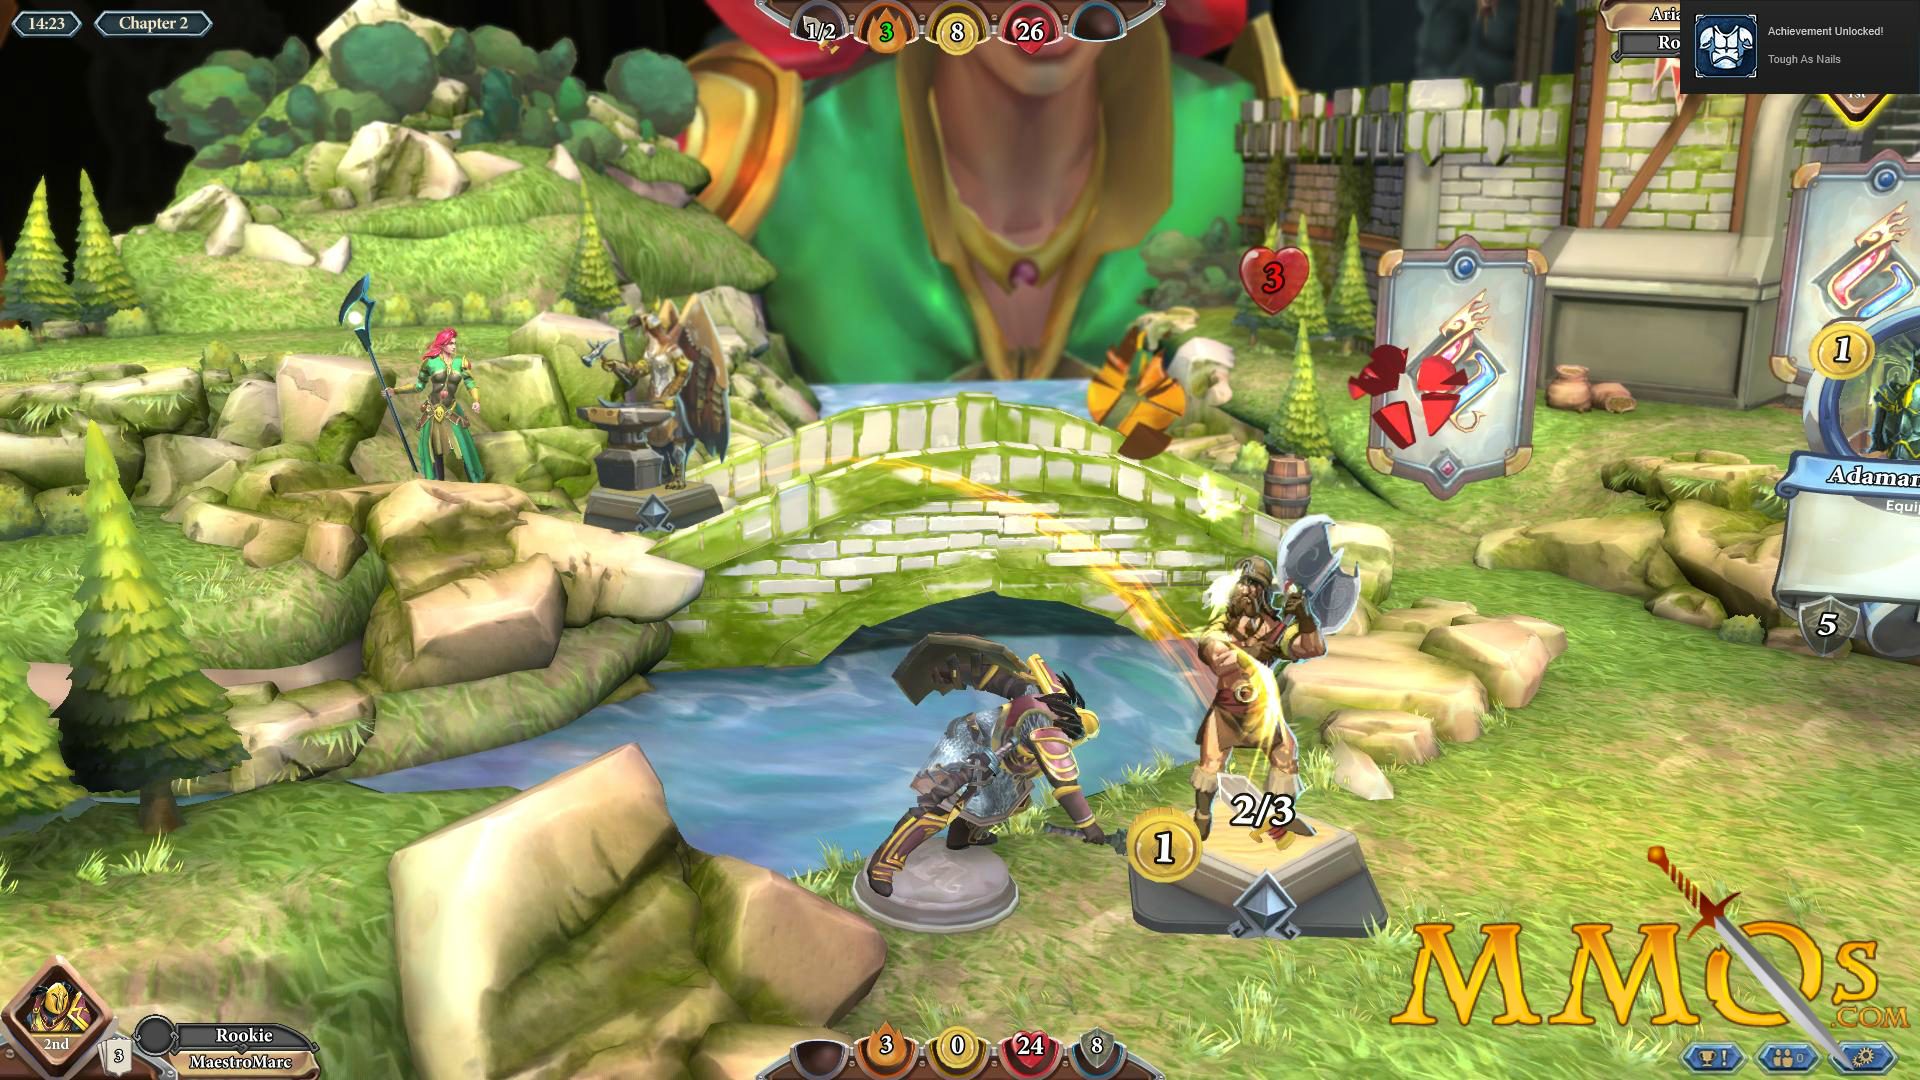 Chronicle: RuneScape Legends Preview - Gamereactor - Chronicle